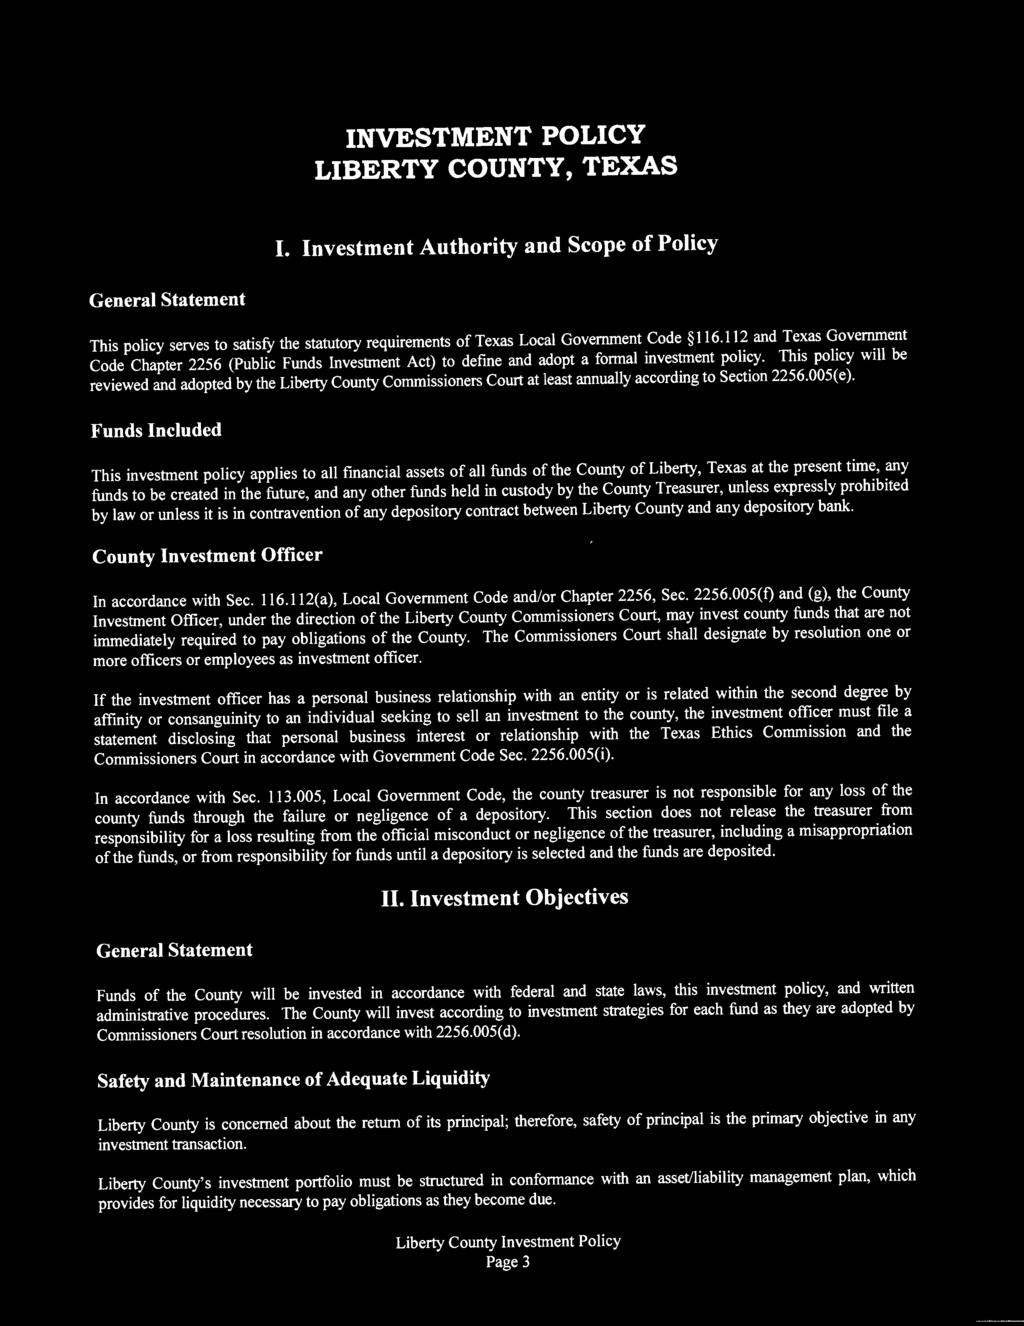 This policy will be reviewed and adopted by the Liberty County Commissioners Court at least annually according to Section 2256.005(e).